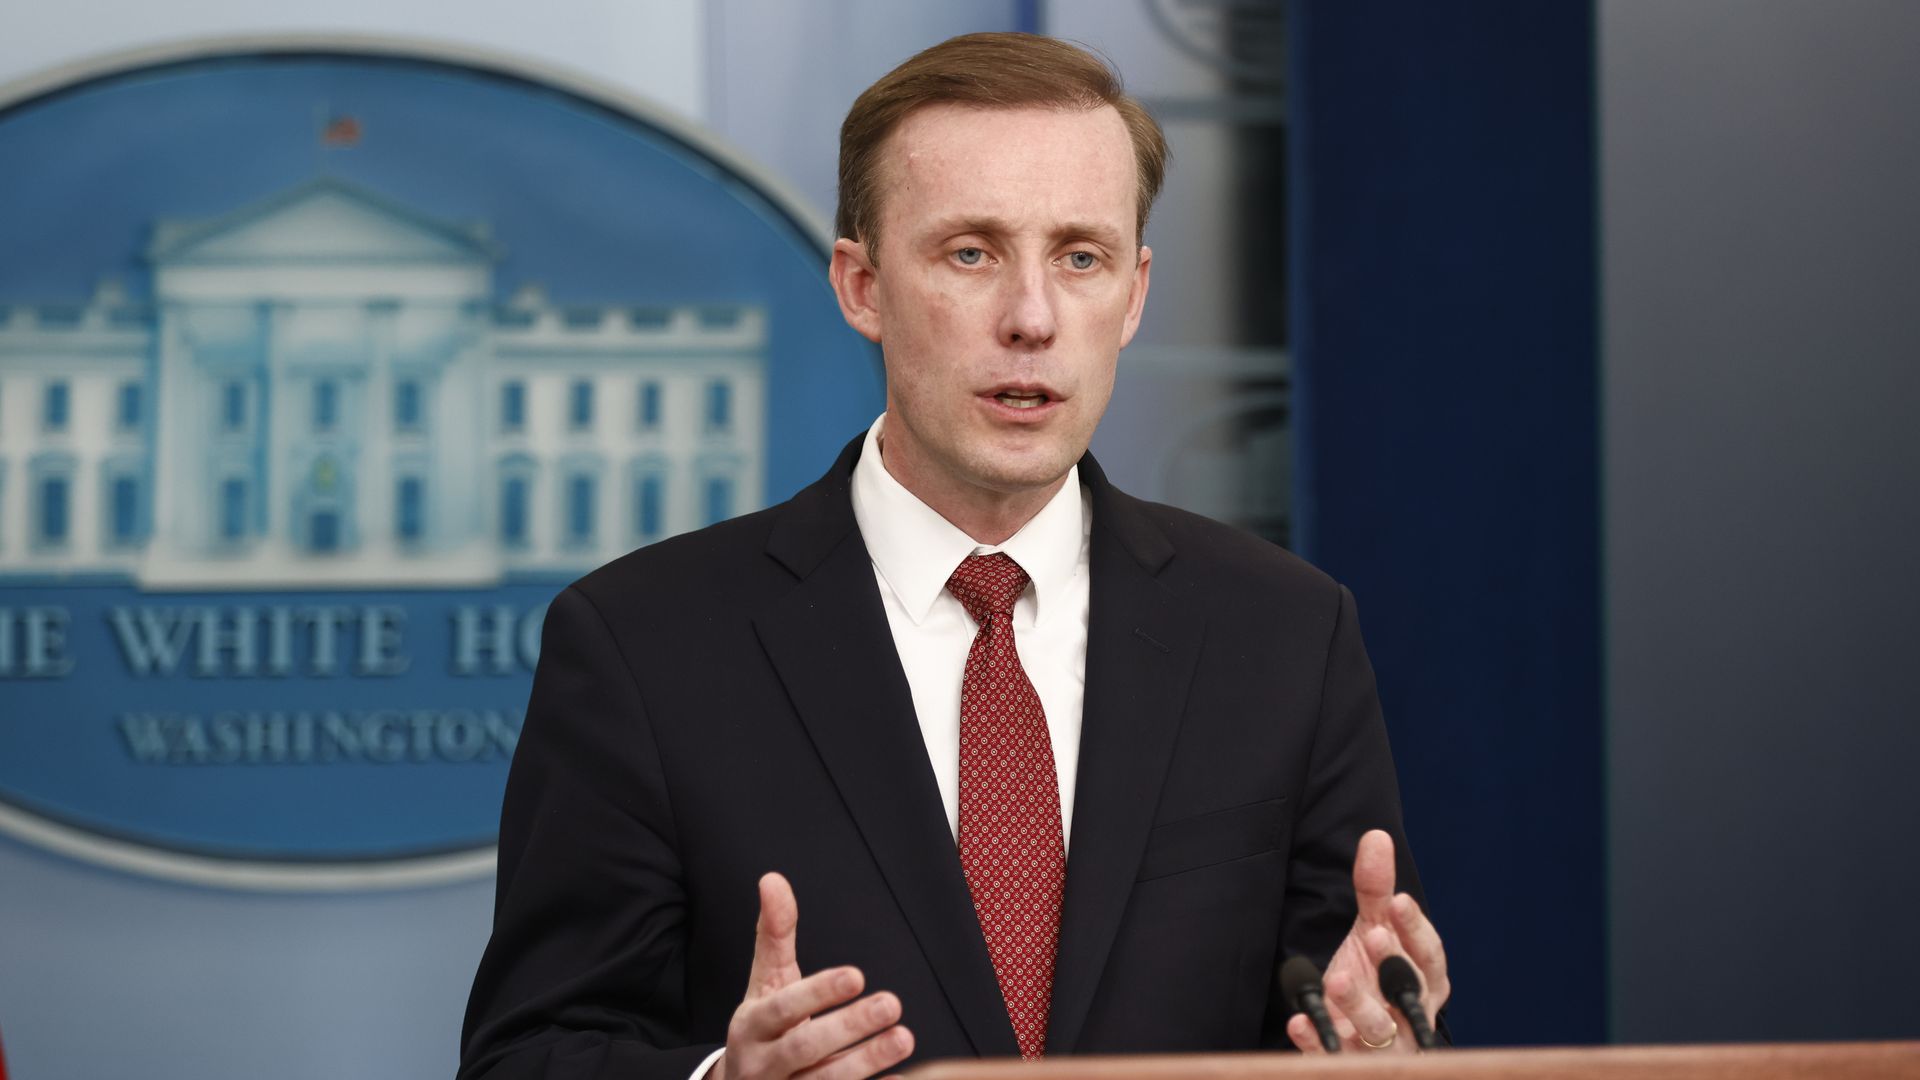 Jake Sullivan, White House national security adviser, speaks during a news conference in the James S. Brady Press Briefing Room at the White House in Washington, D.C., U.S., on Monday, April 4.